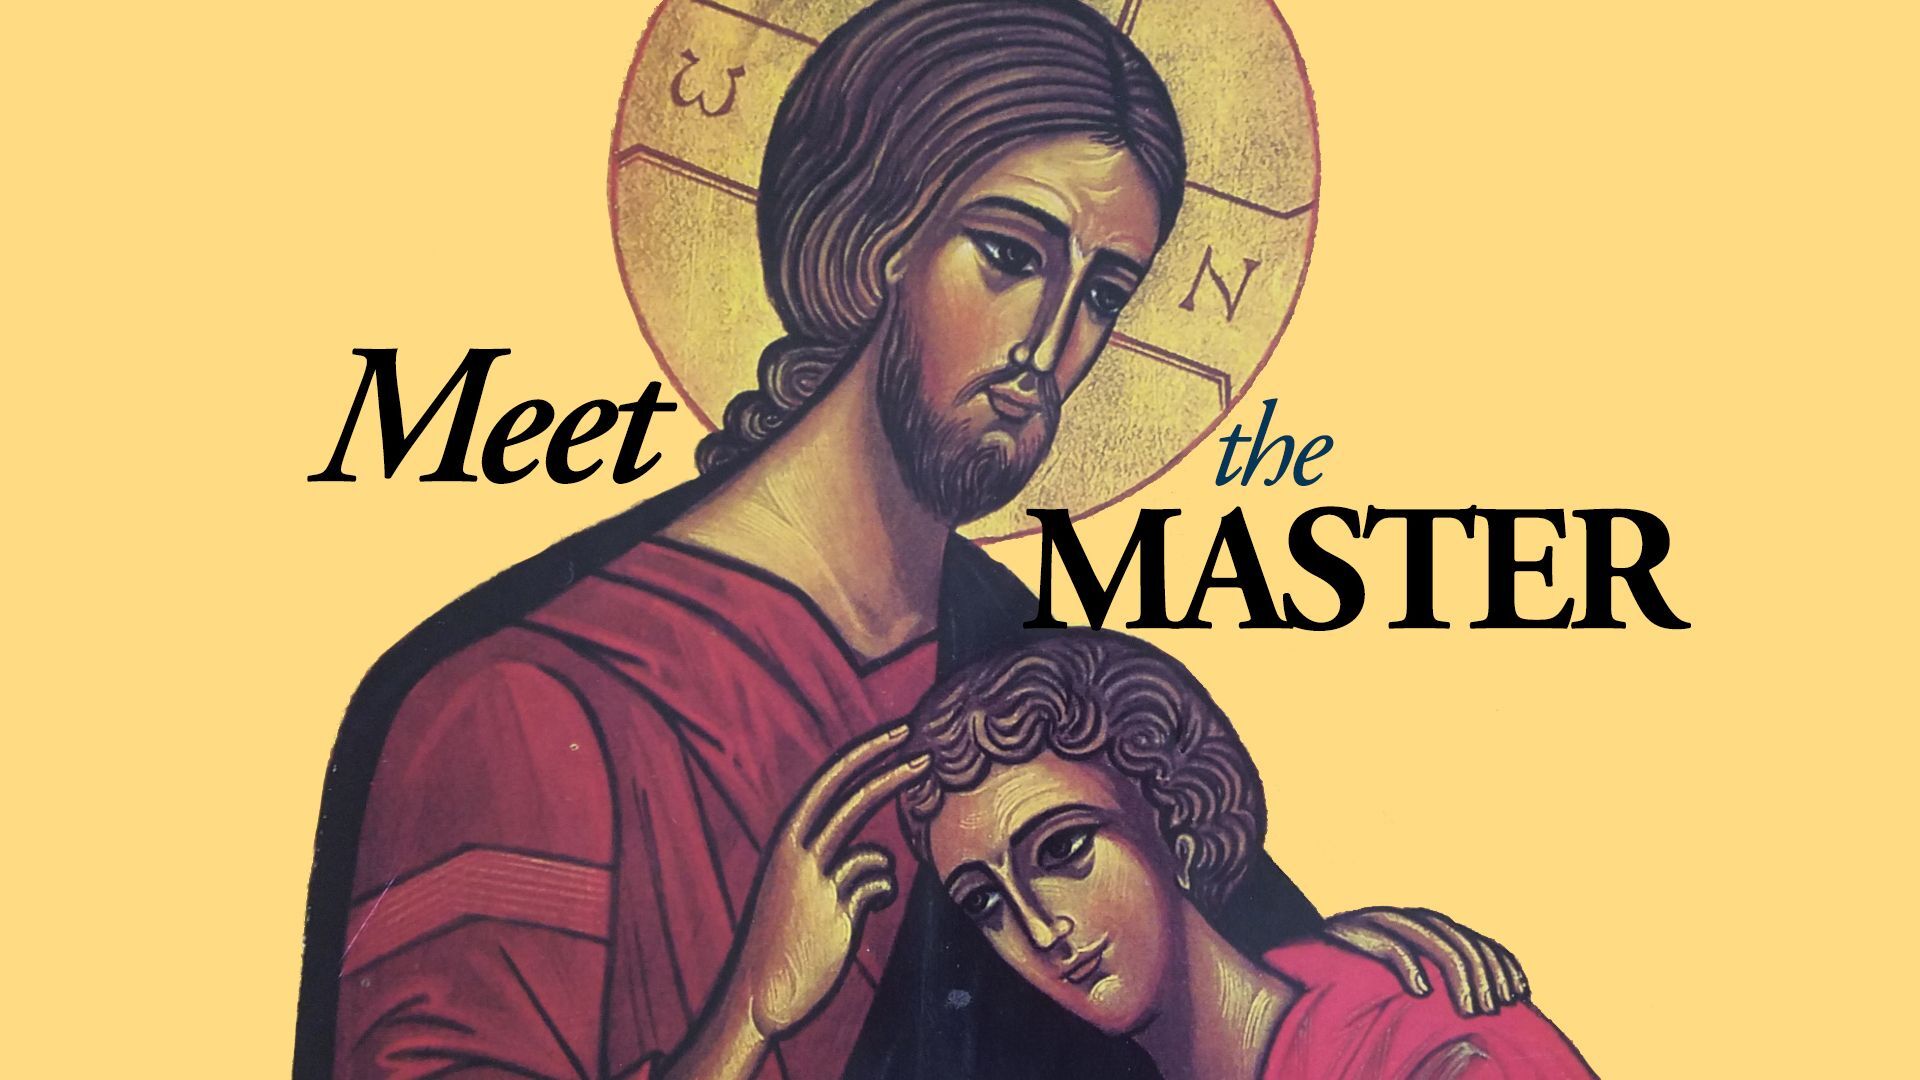 Meet the Master: How Does God Transform Our Suffering?